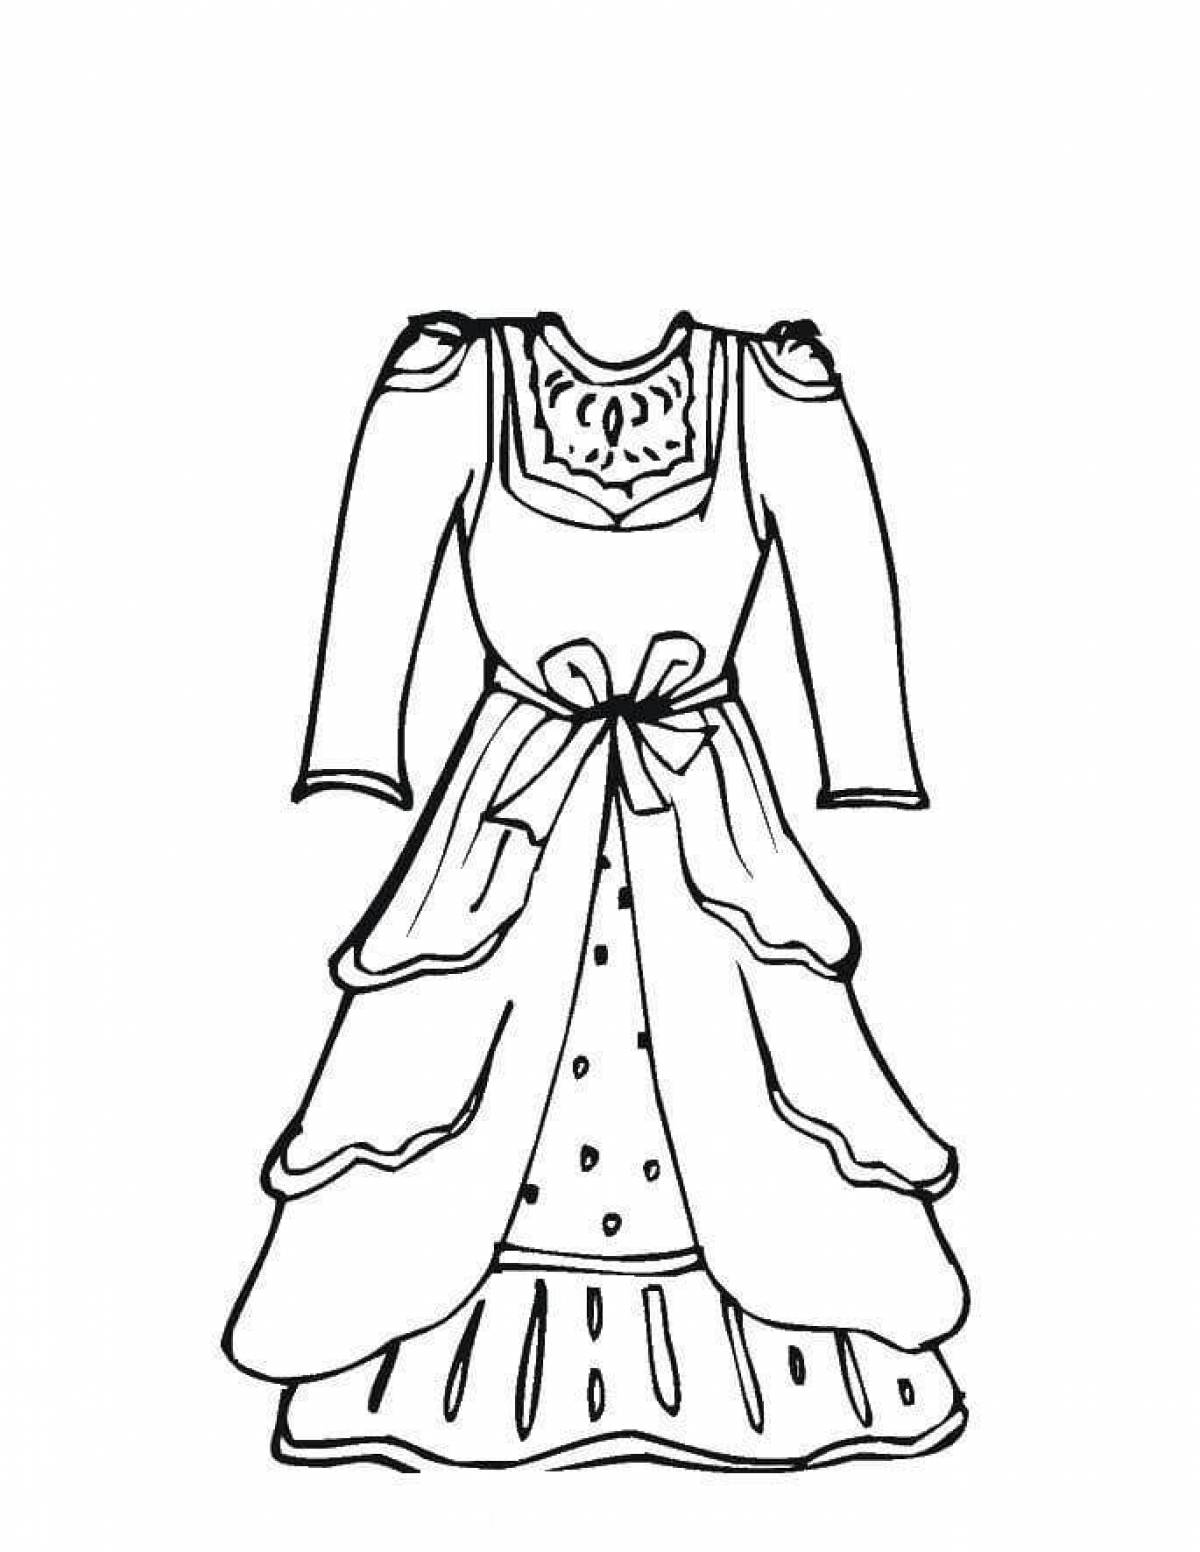 Coloring page exquisite dress for children